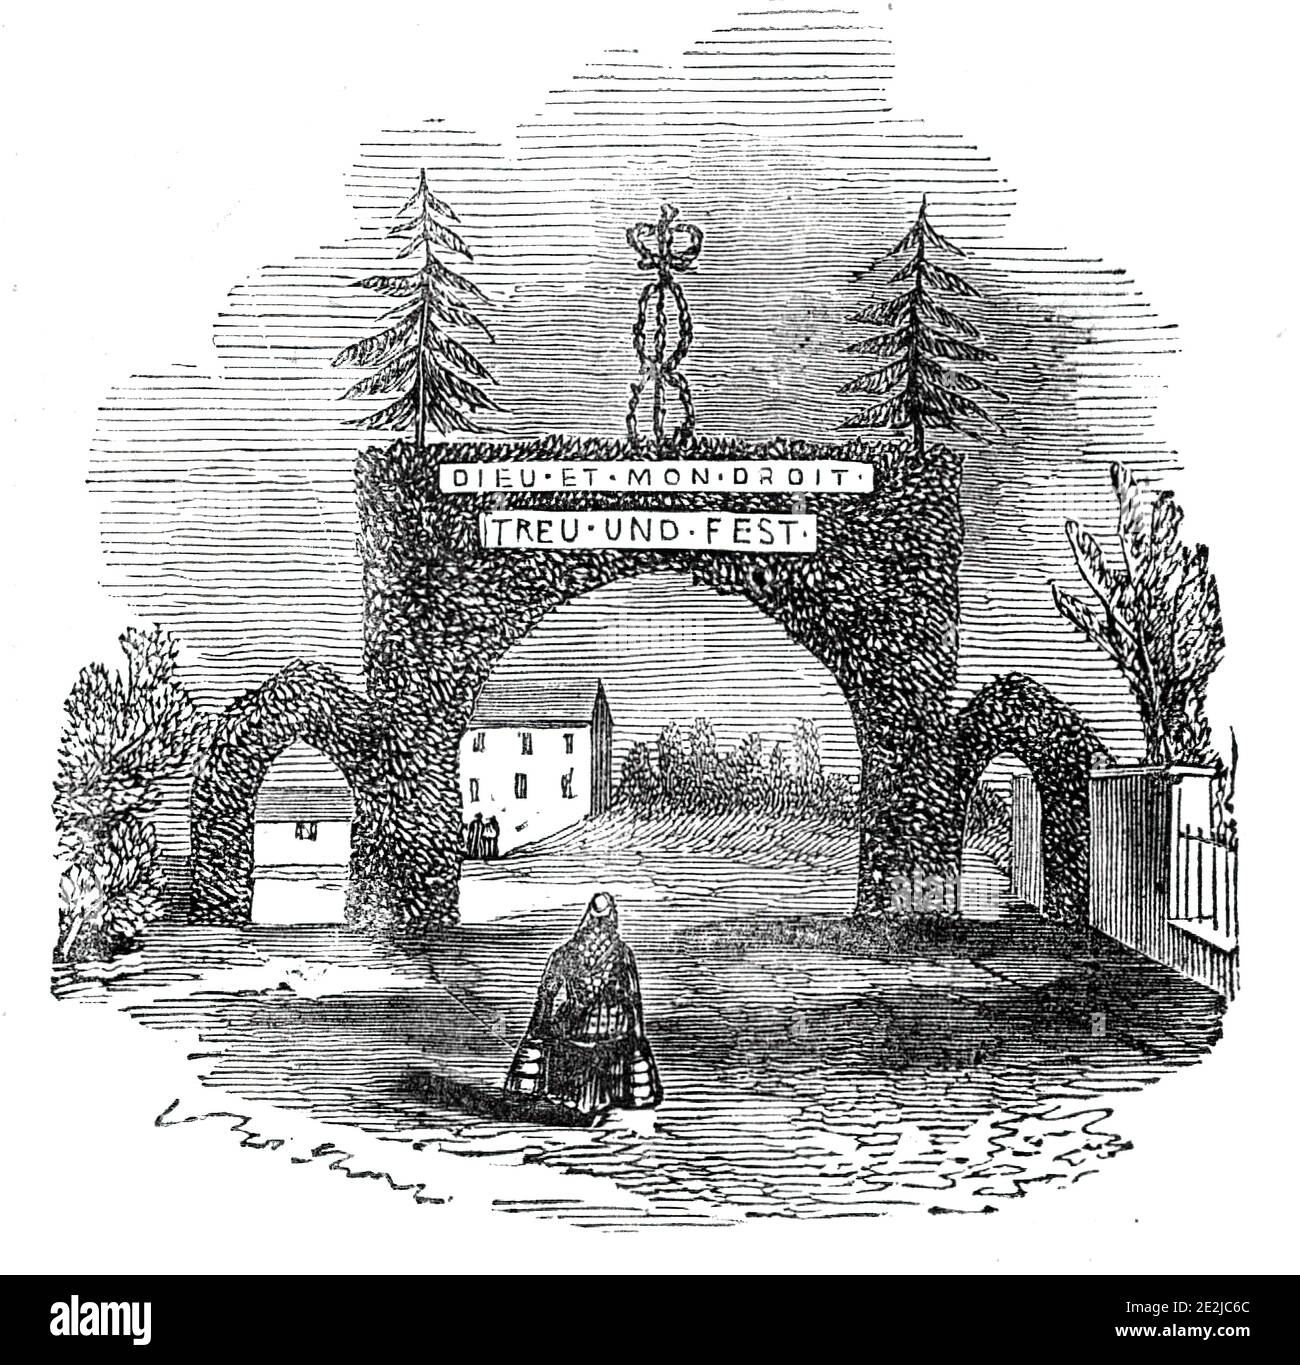 Arch at Coupar Angus, 1844. View of a 'festal arch' in the town of Coupar Angus in Scotland, erected in honour of Queen Victoria and Prince Albert who were staying at nearby Blair Castle. 'Dieu et mon Droit' [God and my right], is the motto of the monarch of the United Kingdom. 'Treu und Feat' [Loyal and Sure], is the motto of the 11th (Prince Albert's Own) Hussars. From &quot;Illustrated London News&quot;, 1844, Vol V. Stock Photo